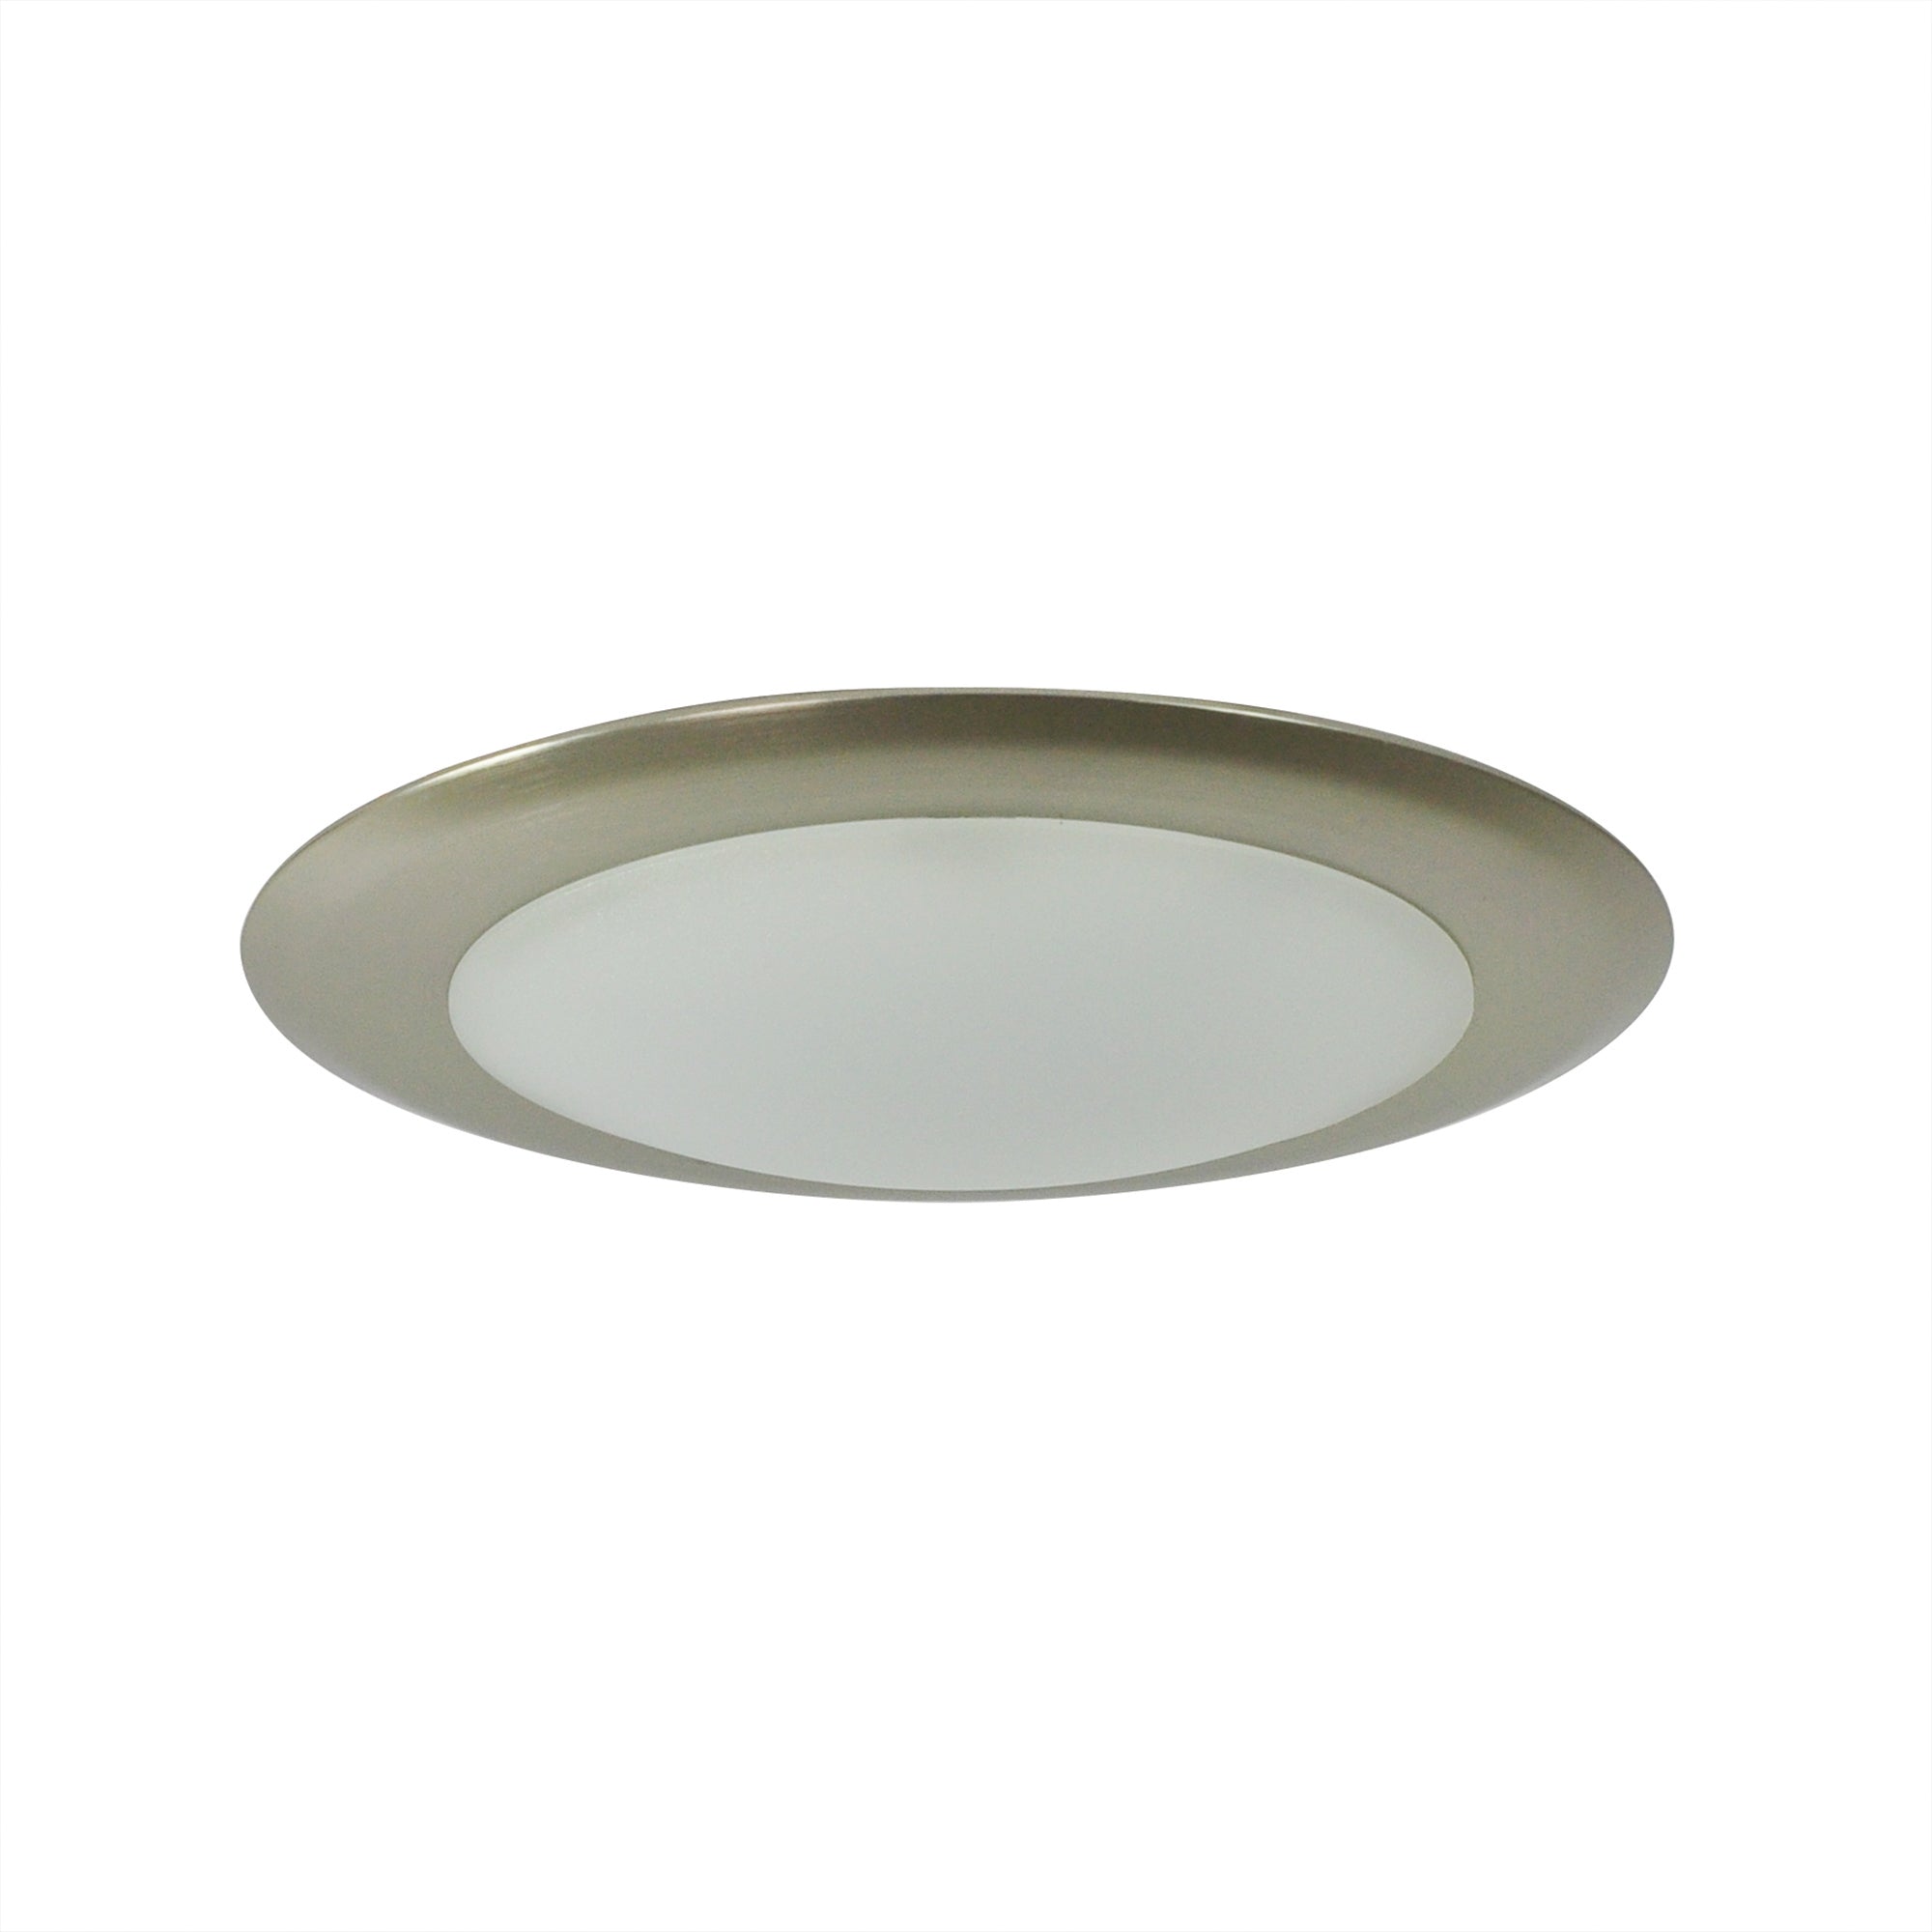 Nora Lighting NLOPAC-R6509T2430NM - Surface - 6 Inch AC Opal LED Surface Mount, 1150lm / 16.5W, 3000K, Natural Metal finish